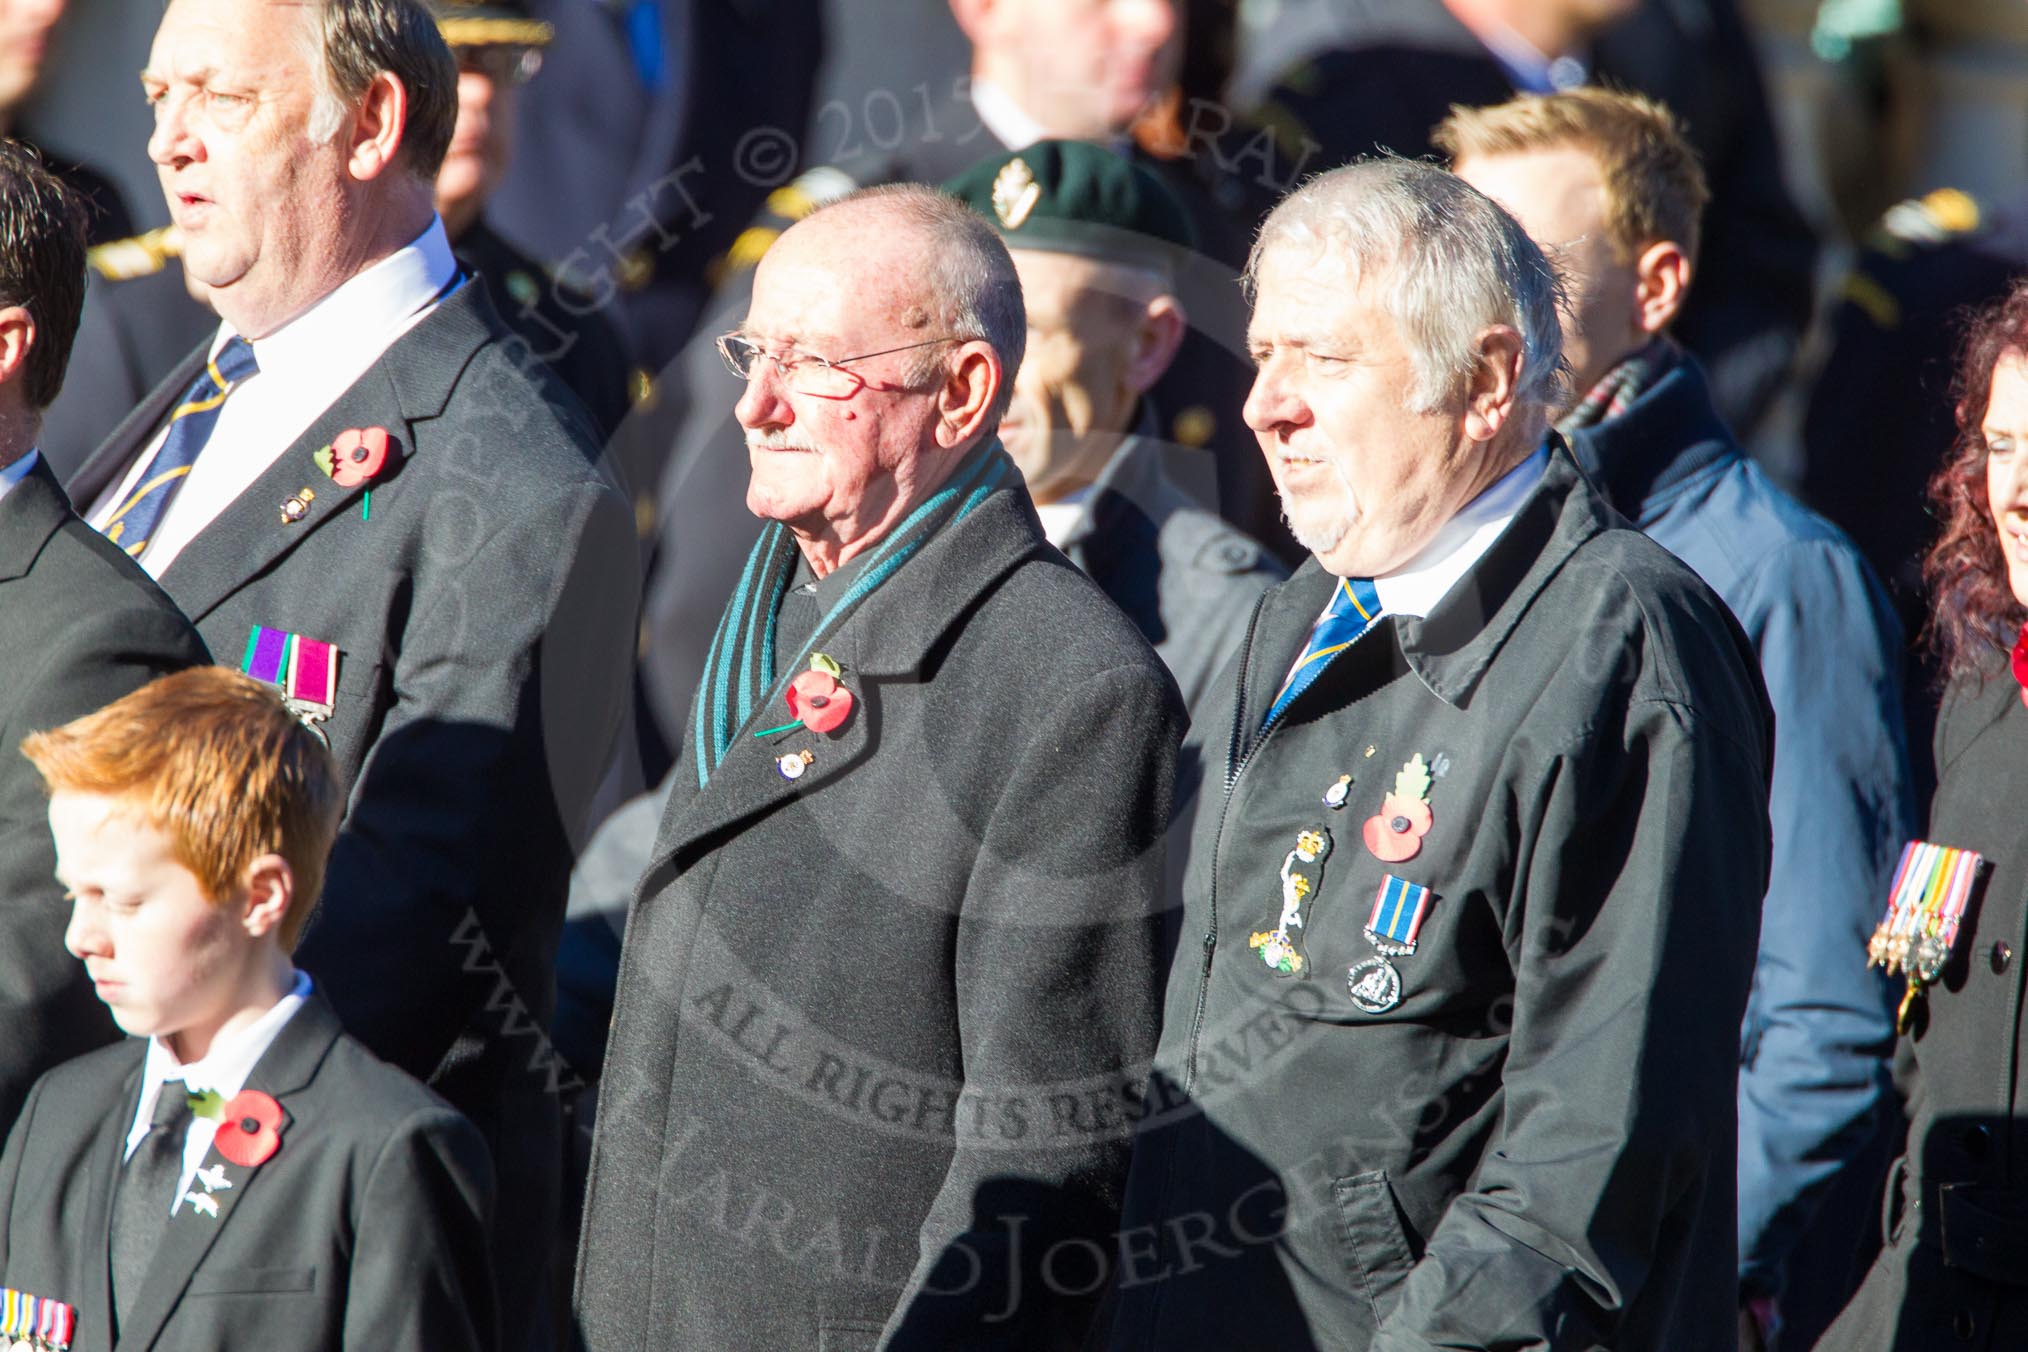 Remembrance Sunday Cenotaph March Past 2013: D13 - The Royal British Legion. There are more photos of this large group, please email Cenotaph@HaraldJoergens.com if interested..
Press stand opposite the Foreign Office building, Whitehall, London SW1,
London,
Greater London,
United Kingdom,
on 10 November 2013 at 11:40, image #118